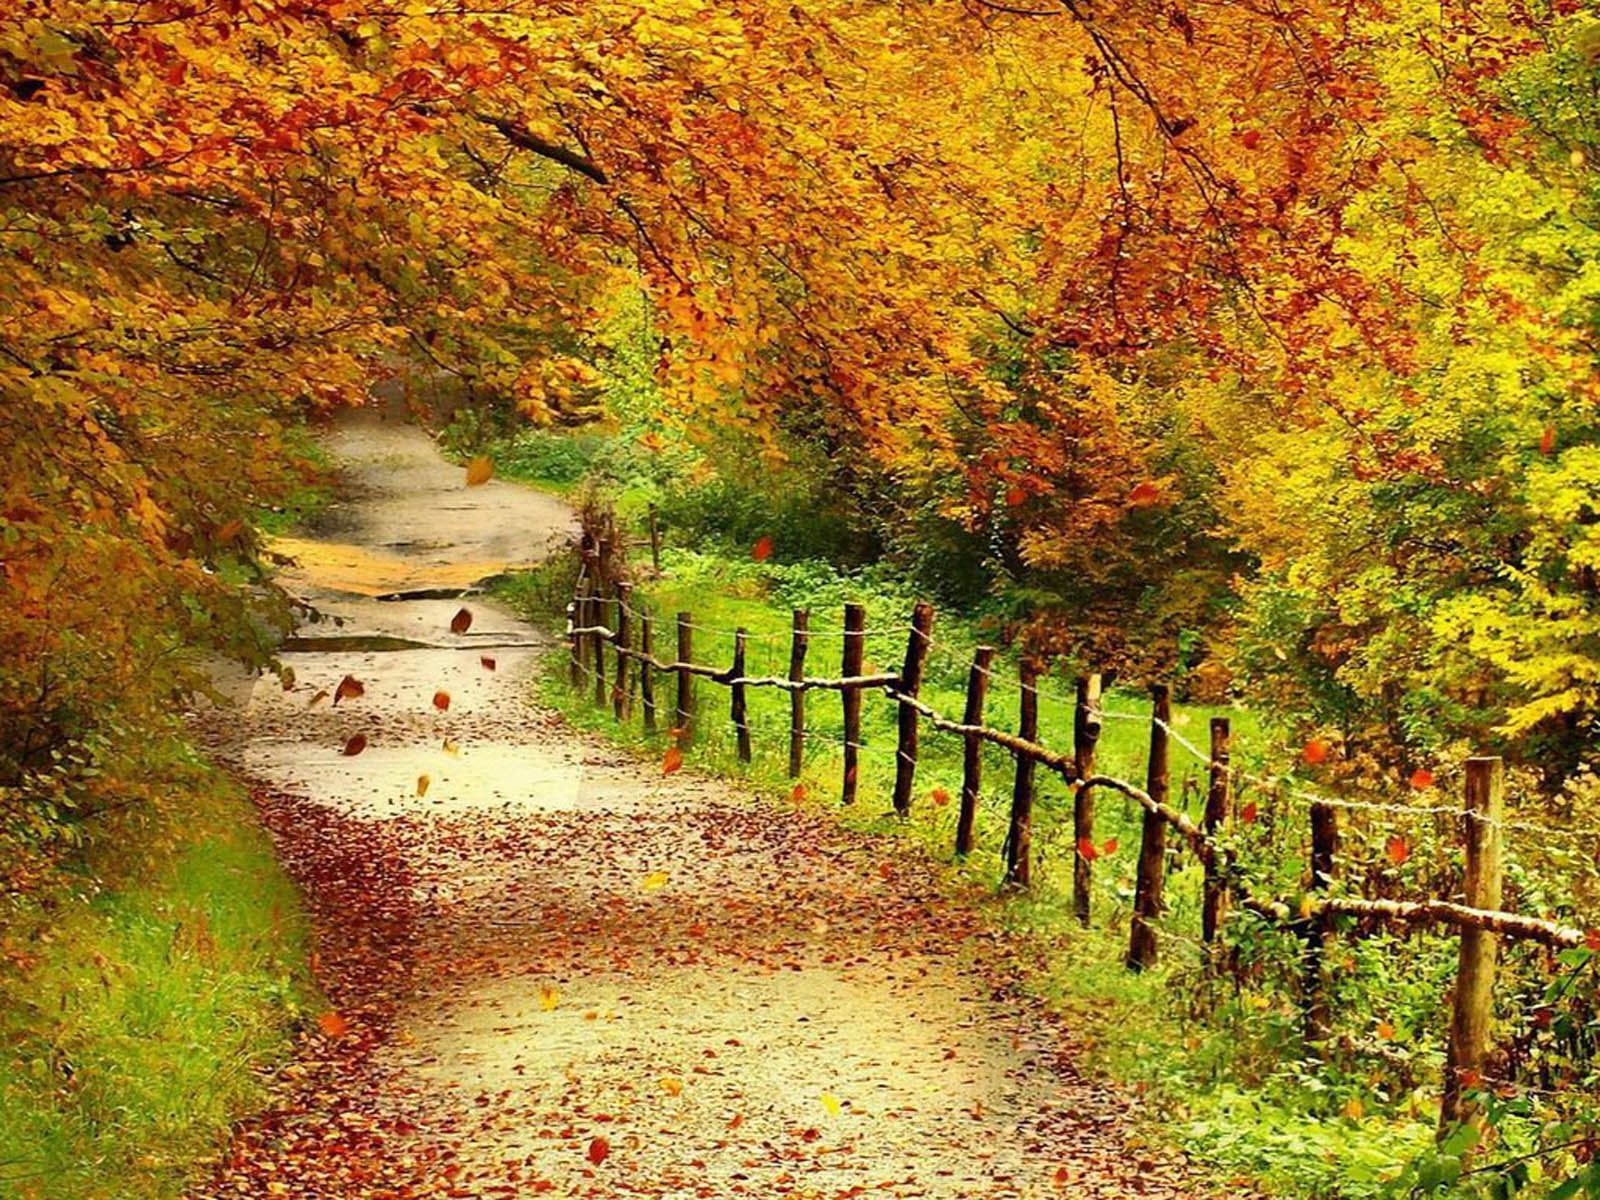  Autumn Scenery Wallpapers Backgrounds Photos Images and Pictures